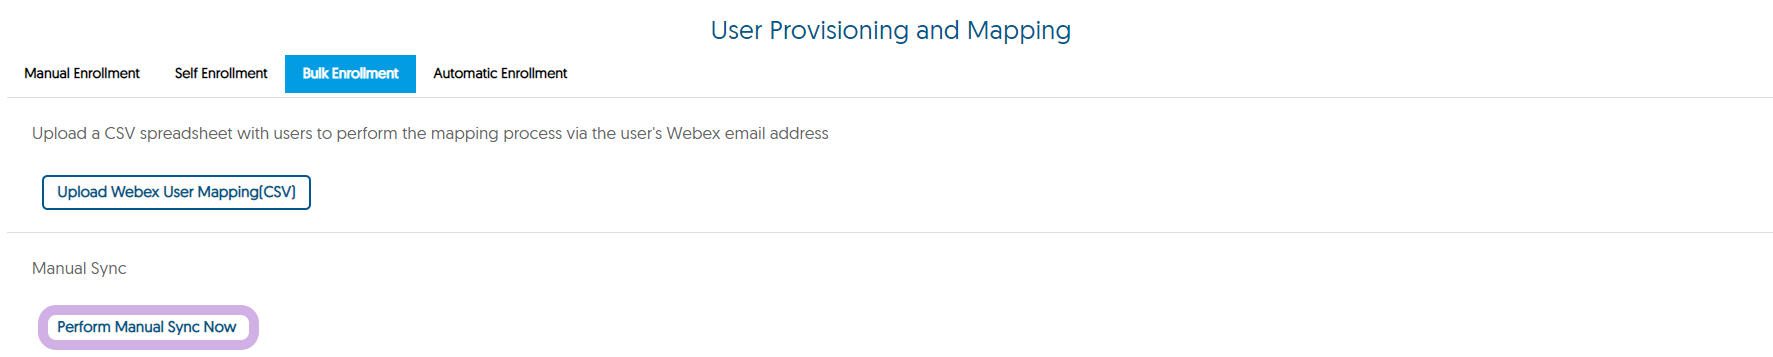 The User Provisioning and Mapping panel for Webex with Perform Manual Sync Now selected from Bulk Enrollment.